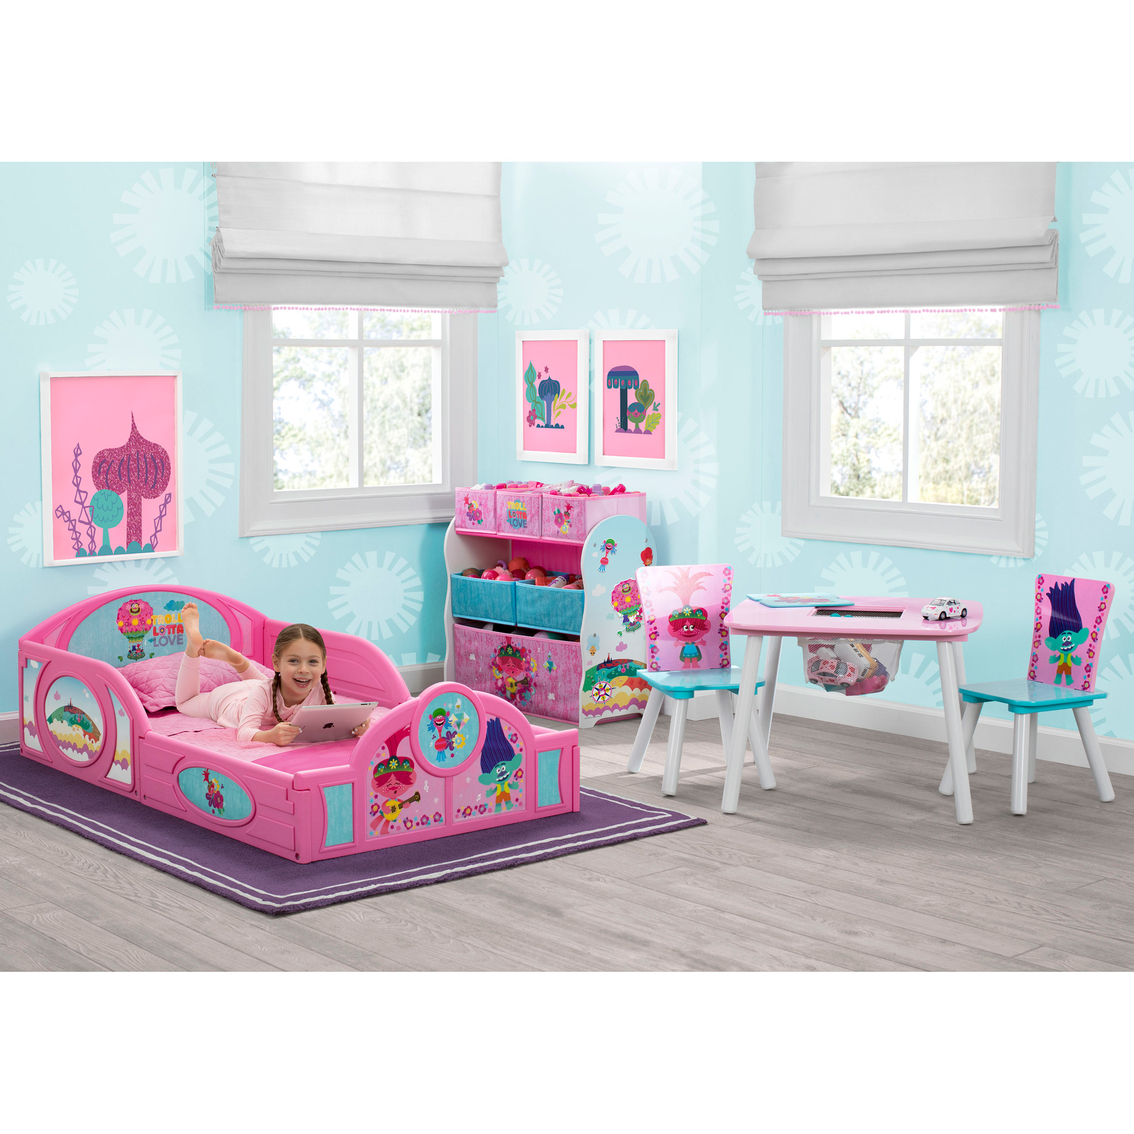 Delta Children Trolls World Tour Plastic Sleep and Play Toddler Bed - Image 9 of 9